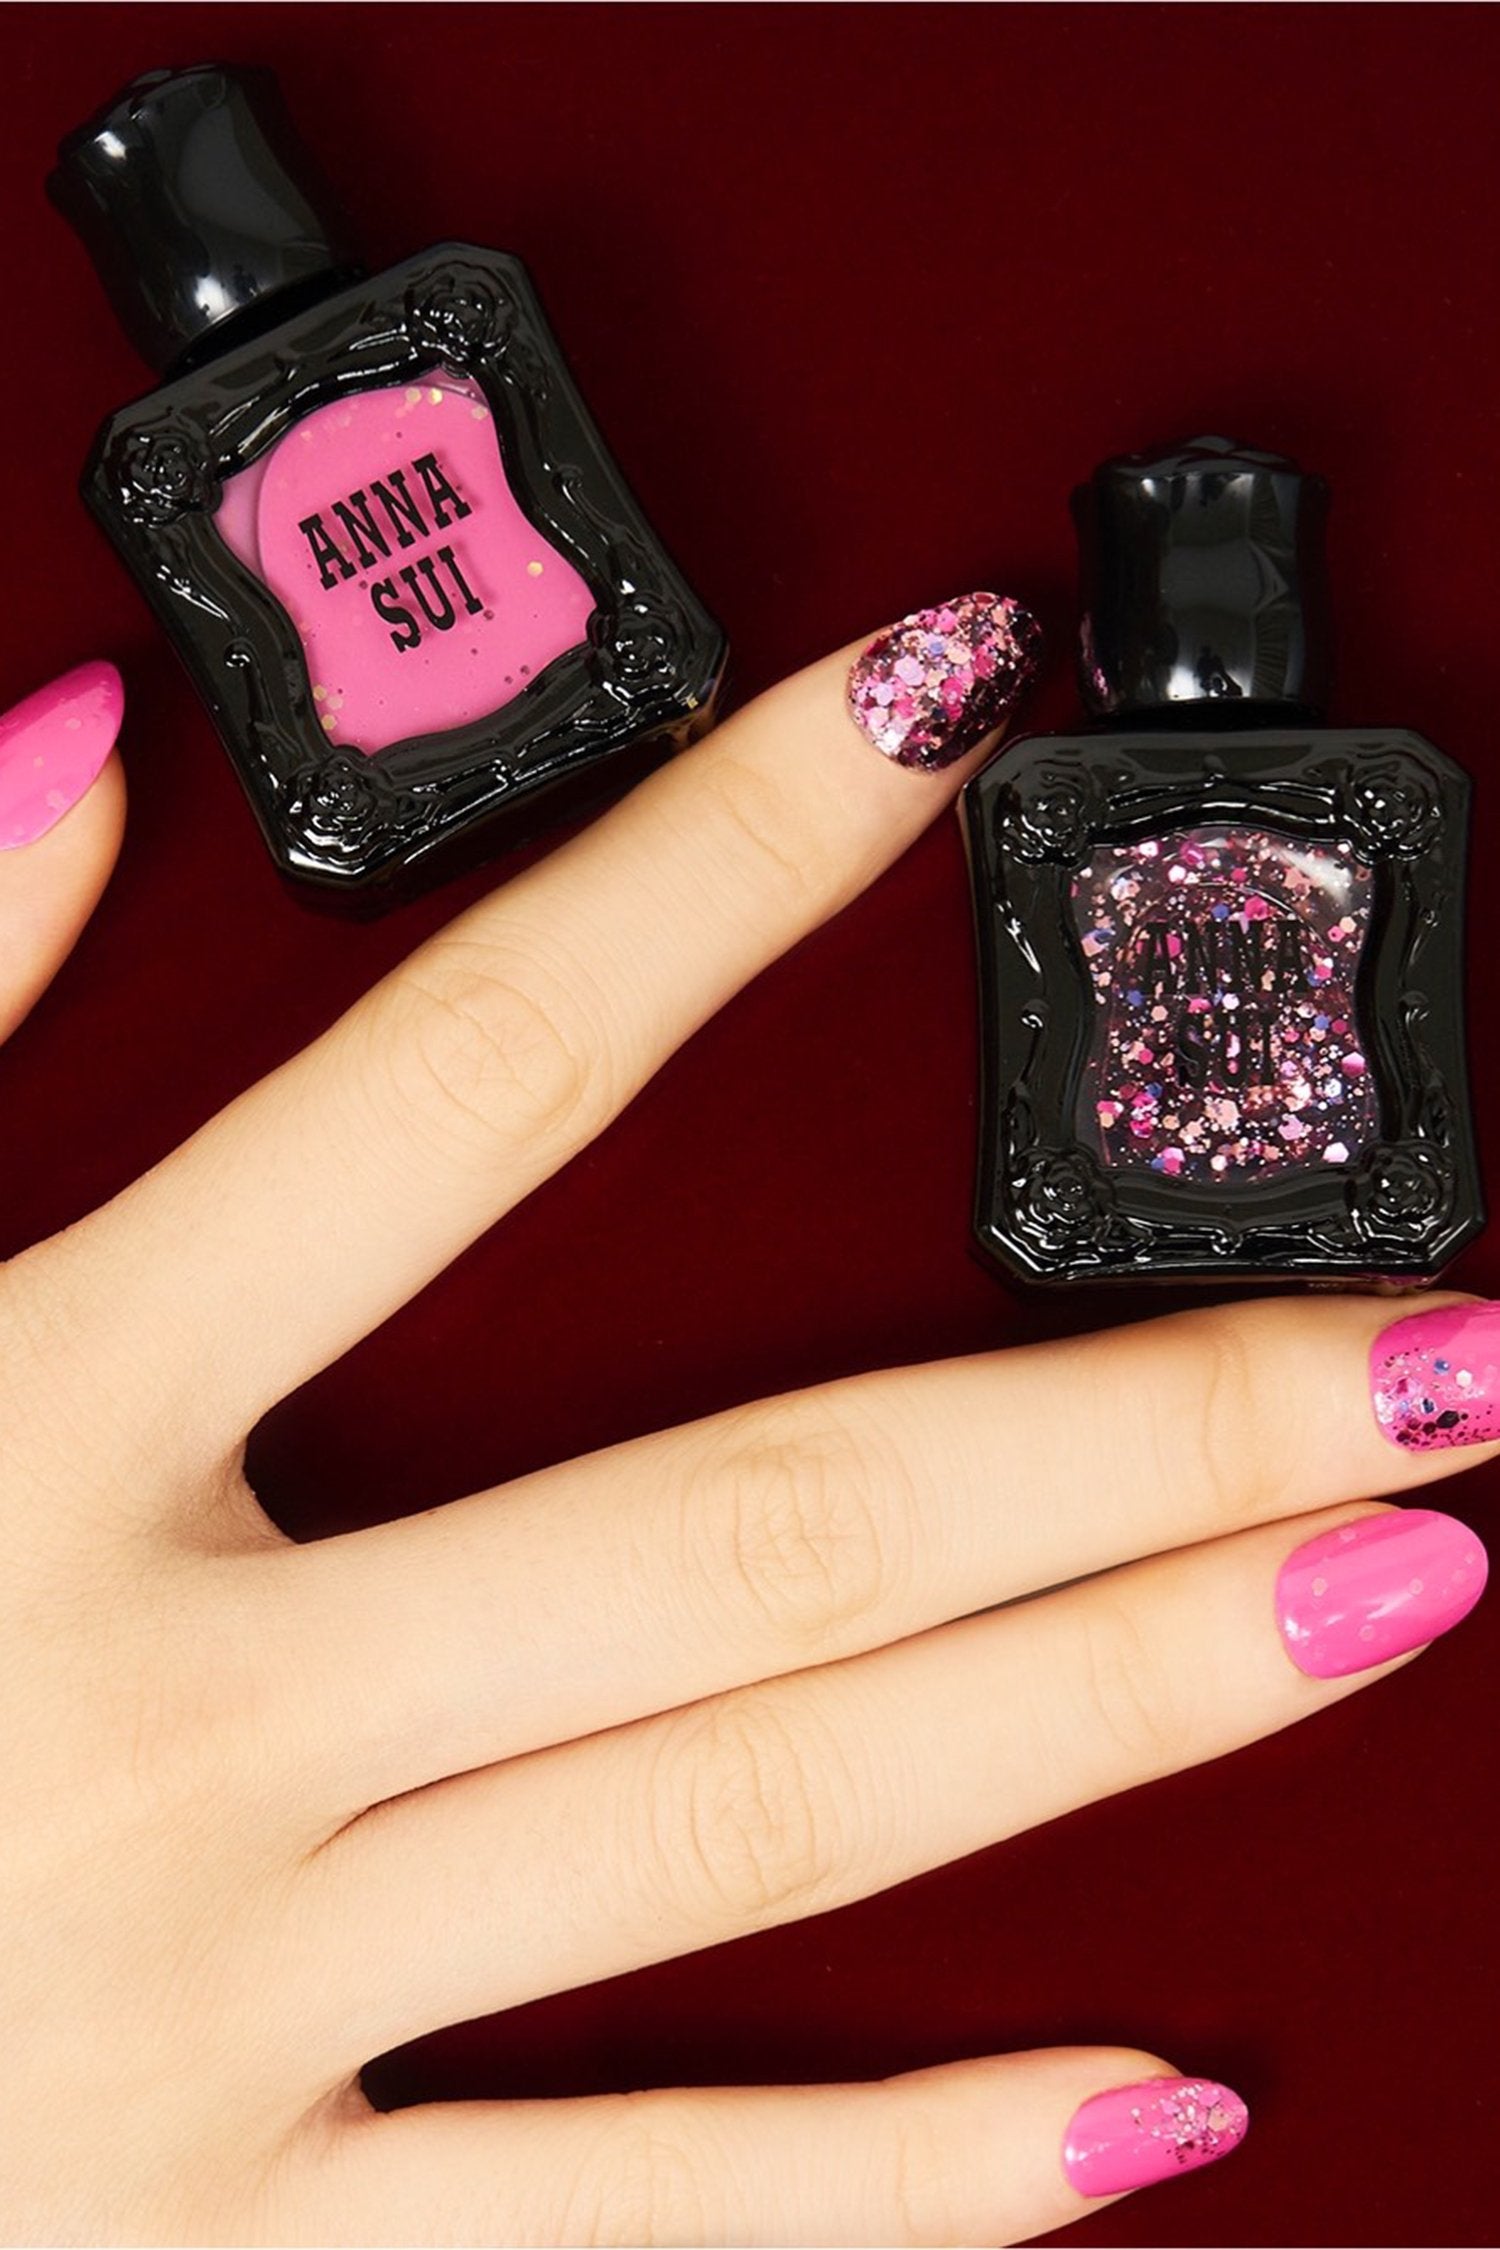 Hand with Nail Polish POPPING BERRY color, Inspired by the Anna Sui fragrance bottle, black container